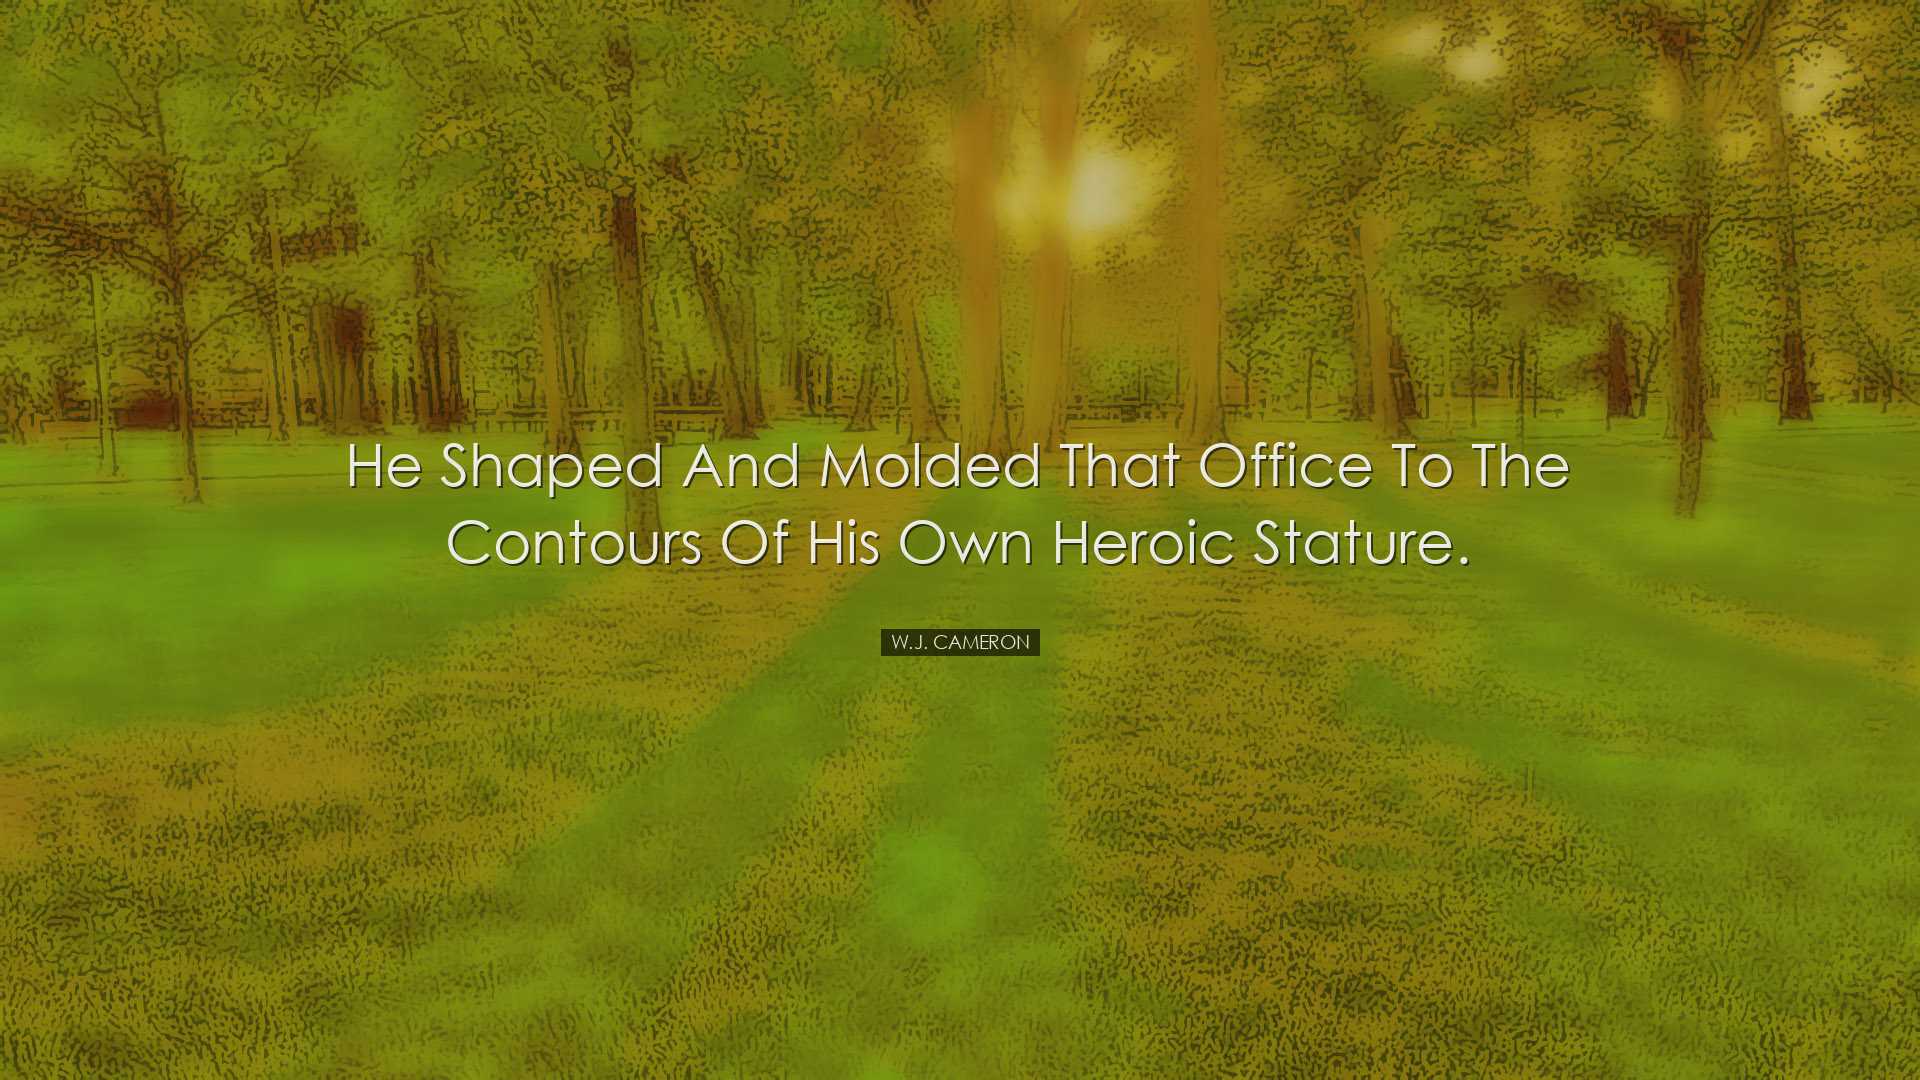 He shaped and molded that office to the contours of his own heroic